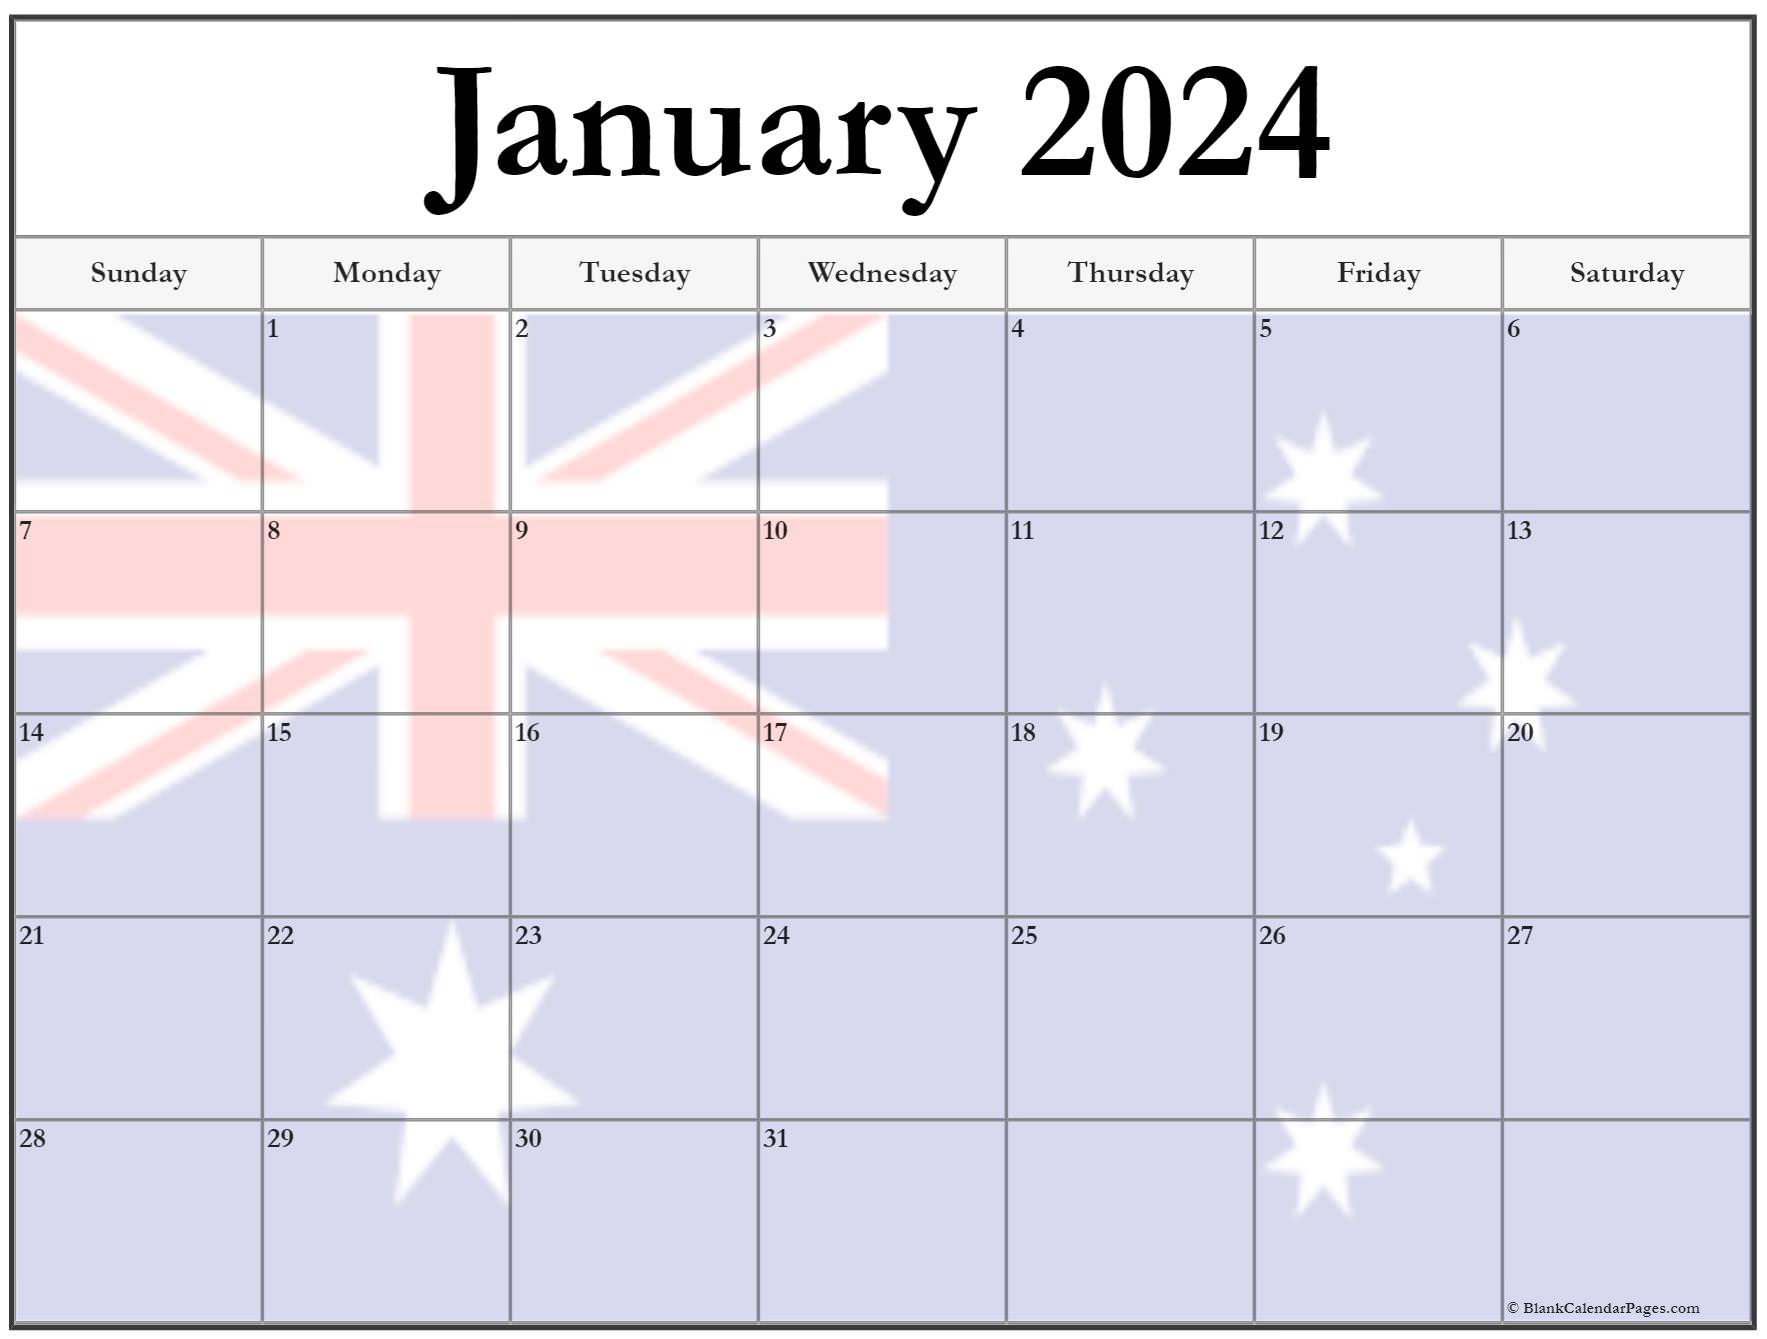 Collection of January 2022 photo calendars with image filters.